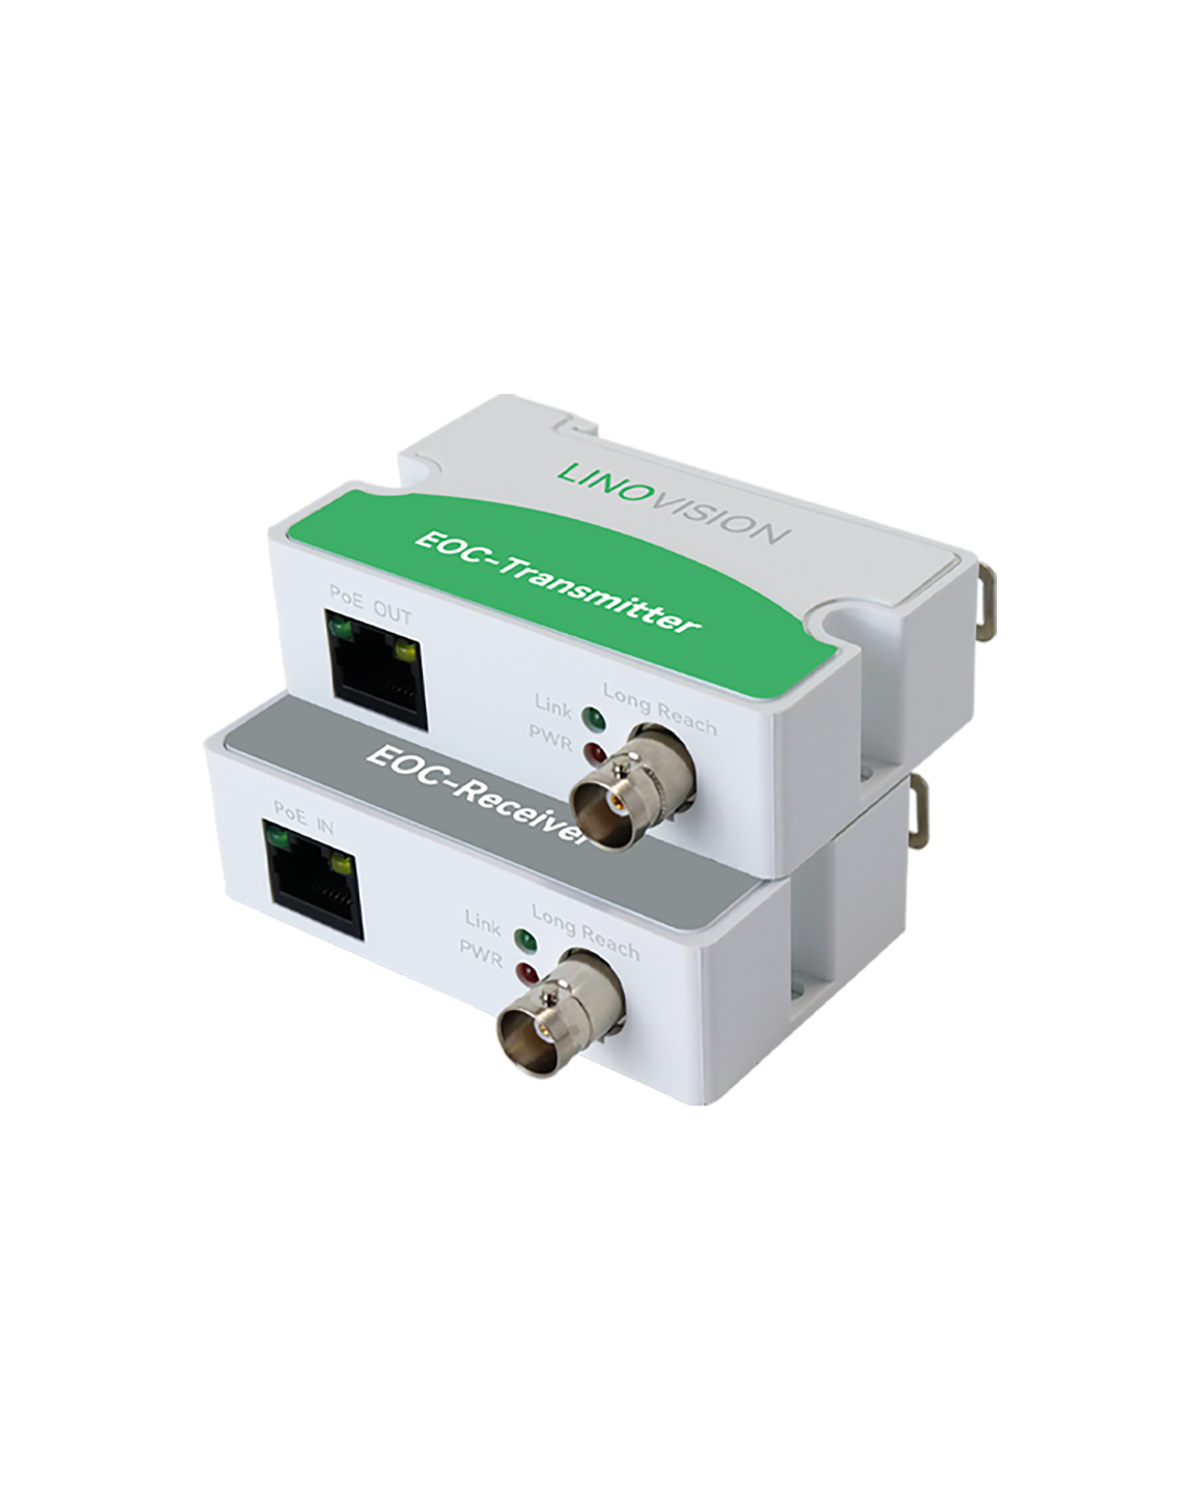 Eoc Converter IP Over Coax Max 3000ft PoE Power and Data Transmission Over Regular RG59 Coaxial Cable